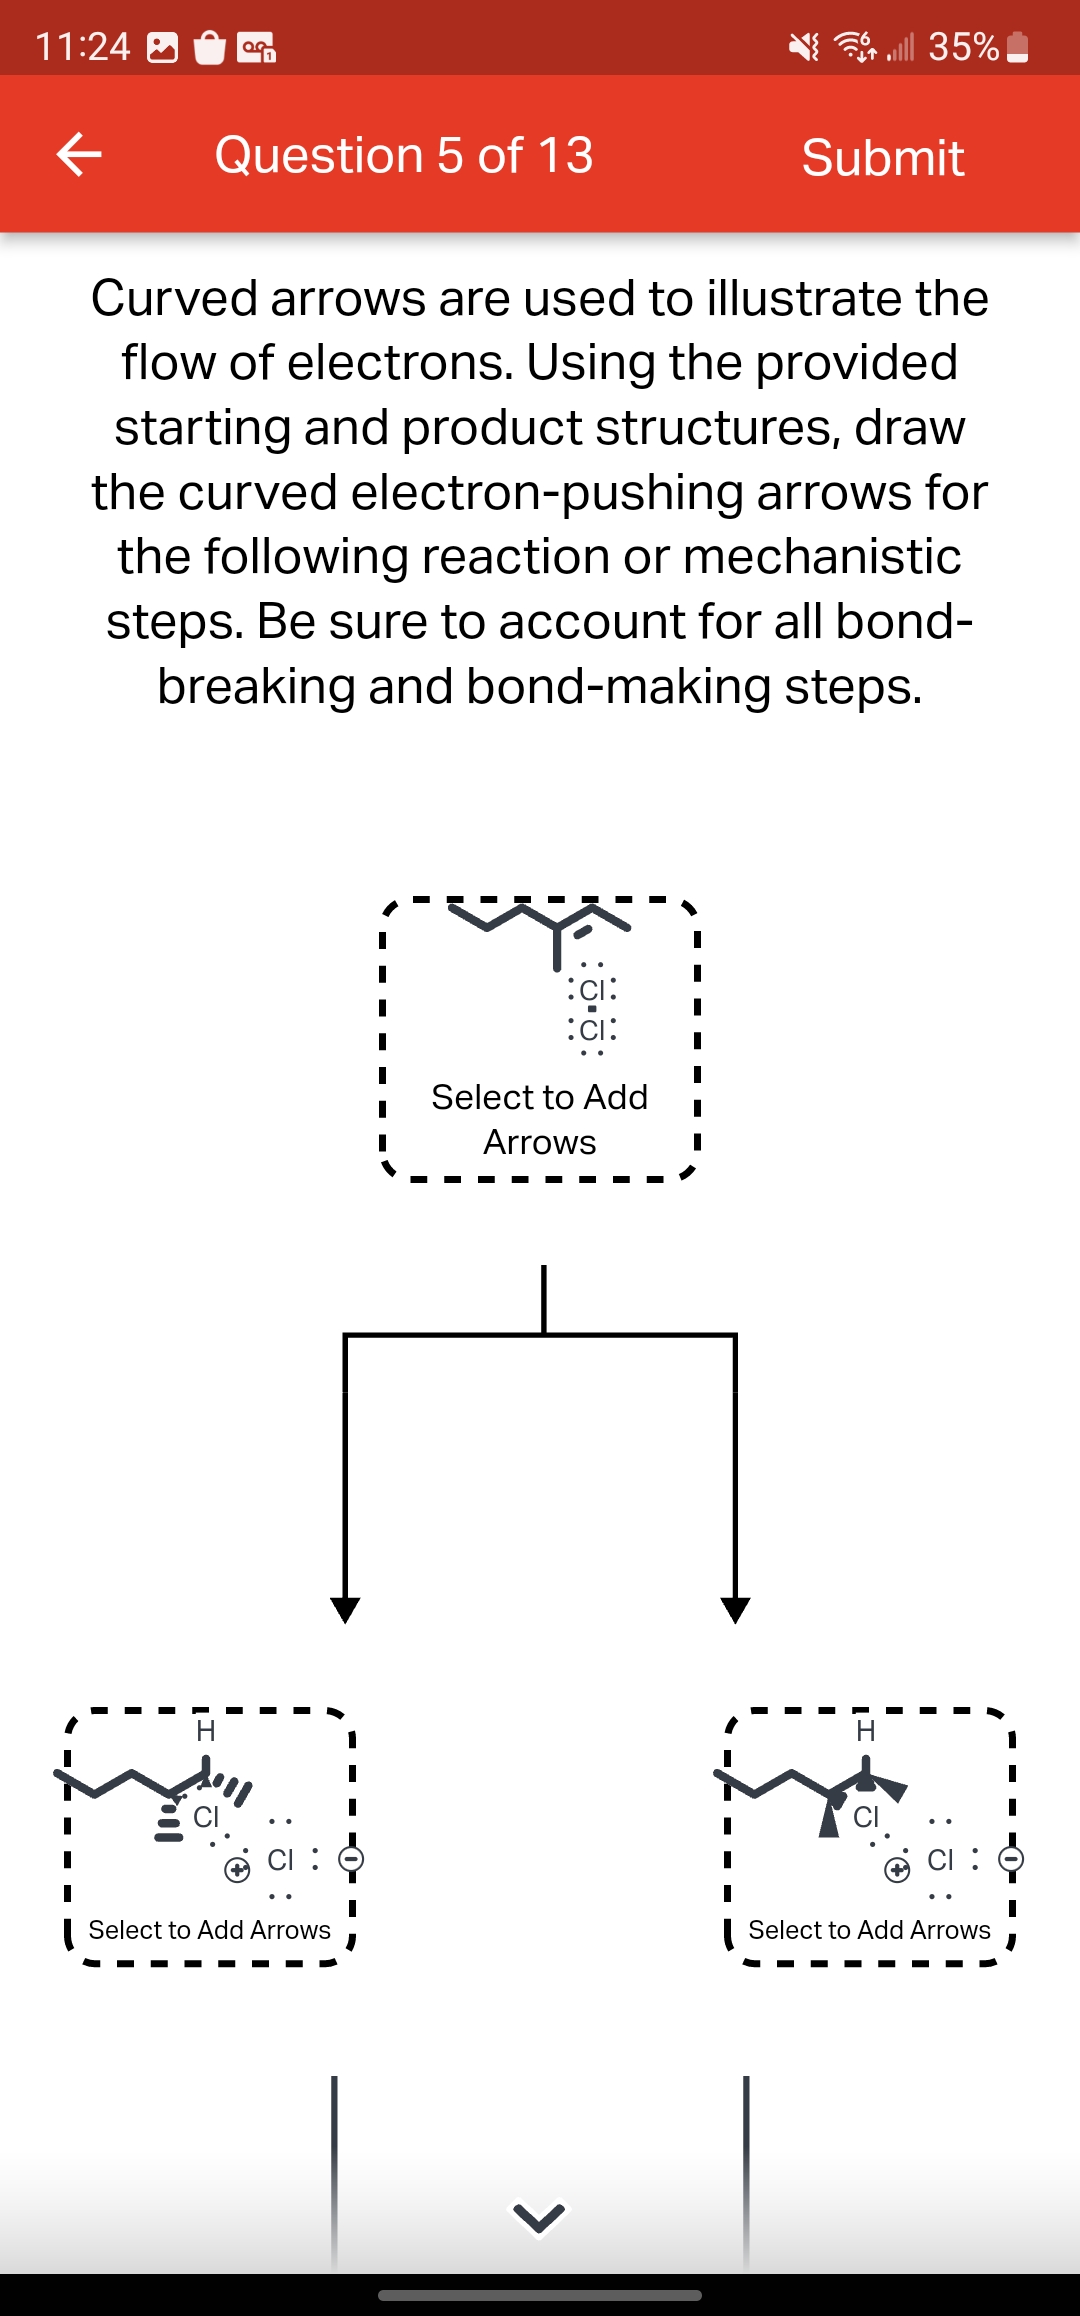 11:24
←
0.0
Question 5 of 13
H
Curved arrows are used to illustrate the
flow of electrons. Using the provided
starting and product structures, draw
the curved electron-pushing arrows for
the following reaction or mechanistic
steps. Be sure to account for all bond-
breaking and bond-making steps.
Select to Add Arrows
:CI:
:CI:
Select to Add
Arrows
>
I
all 35%
Submit
CI
Select to Add Arrows